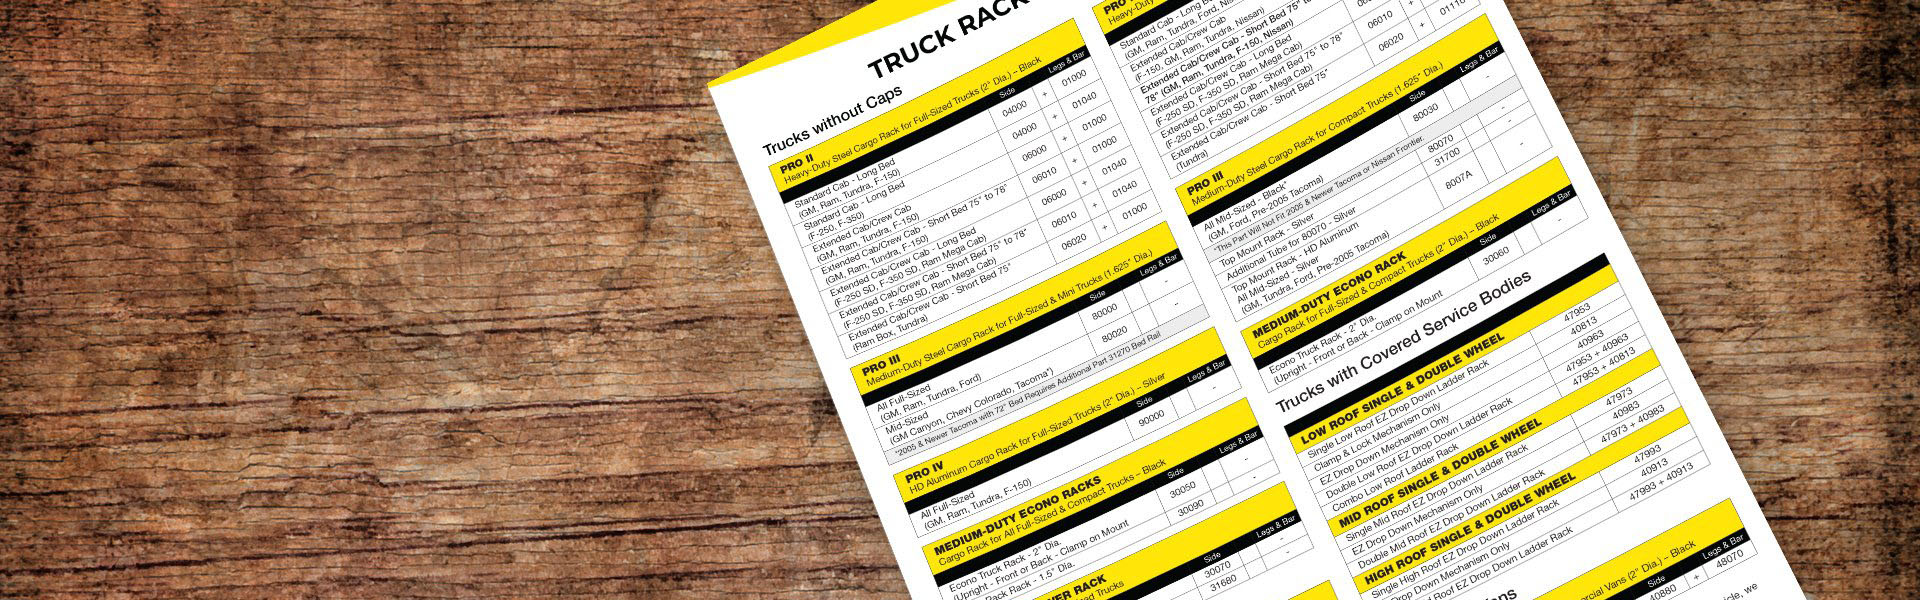 Truck Application Guide